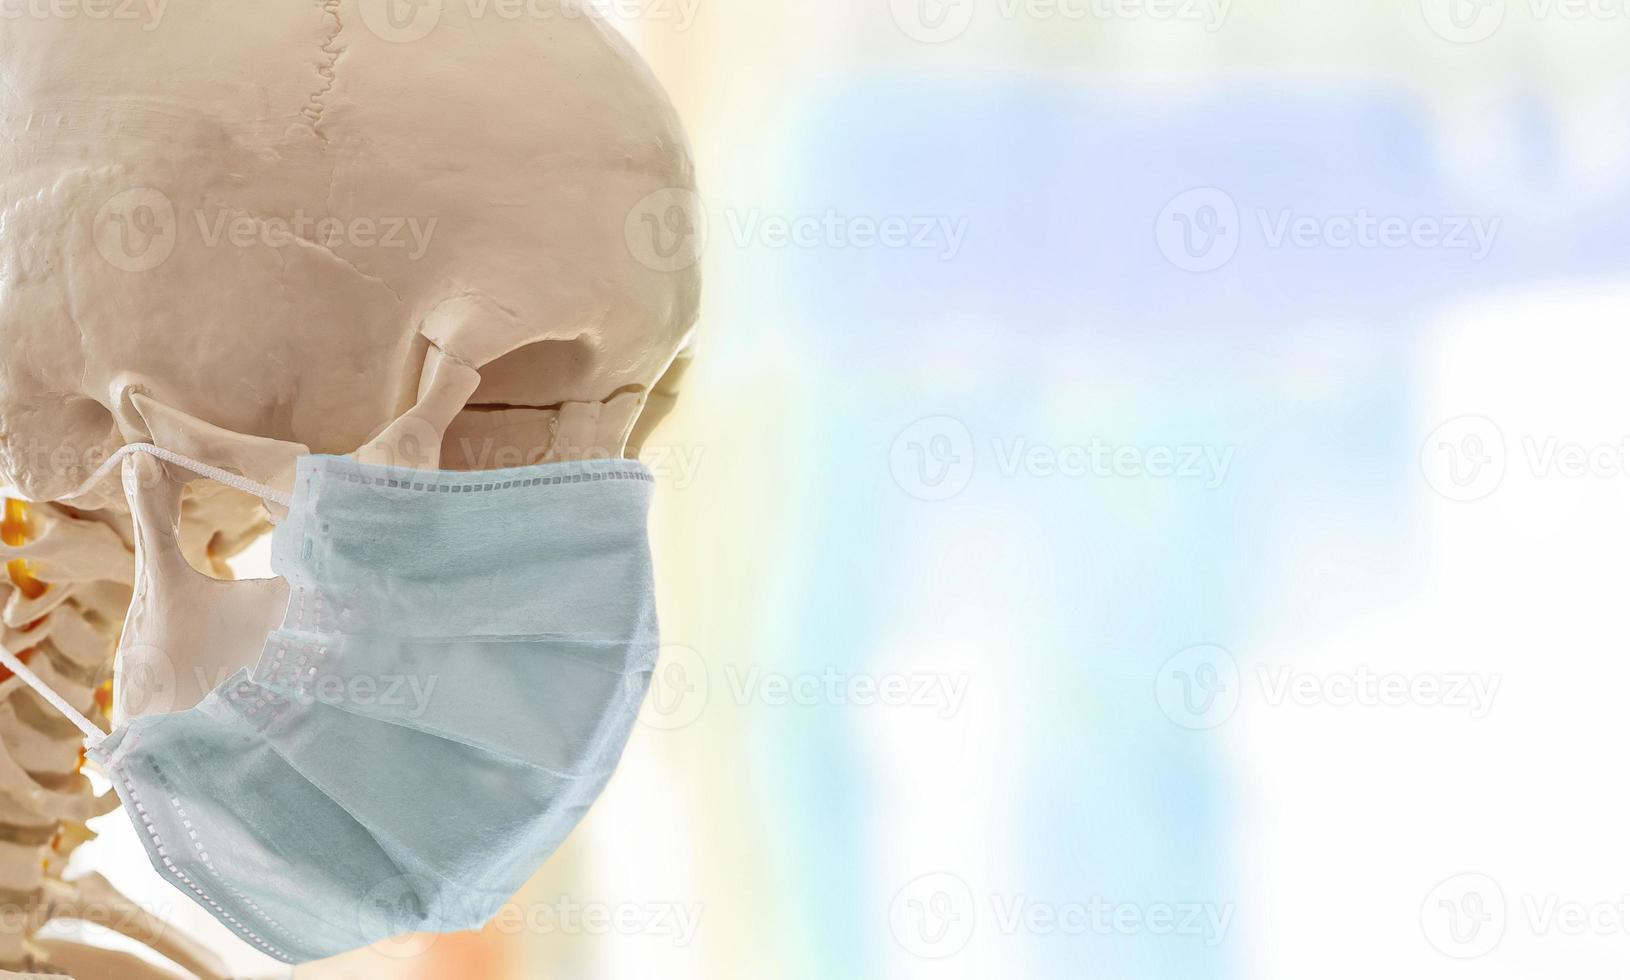 Human skull in simple thin medical mask for protection against viral infection photo